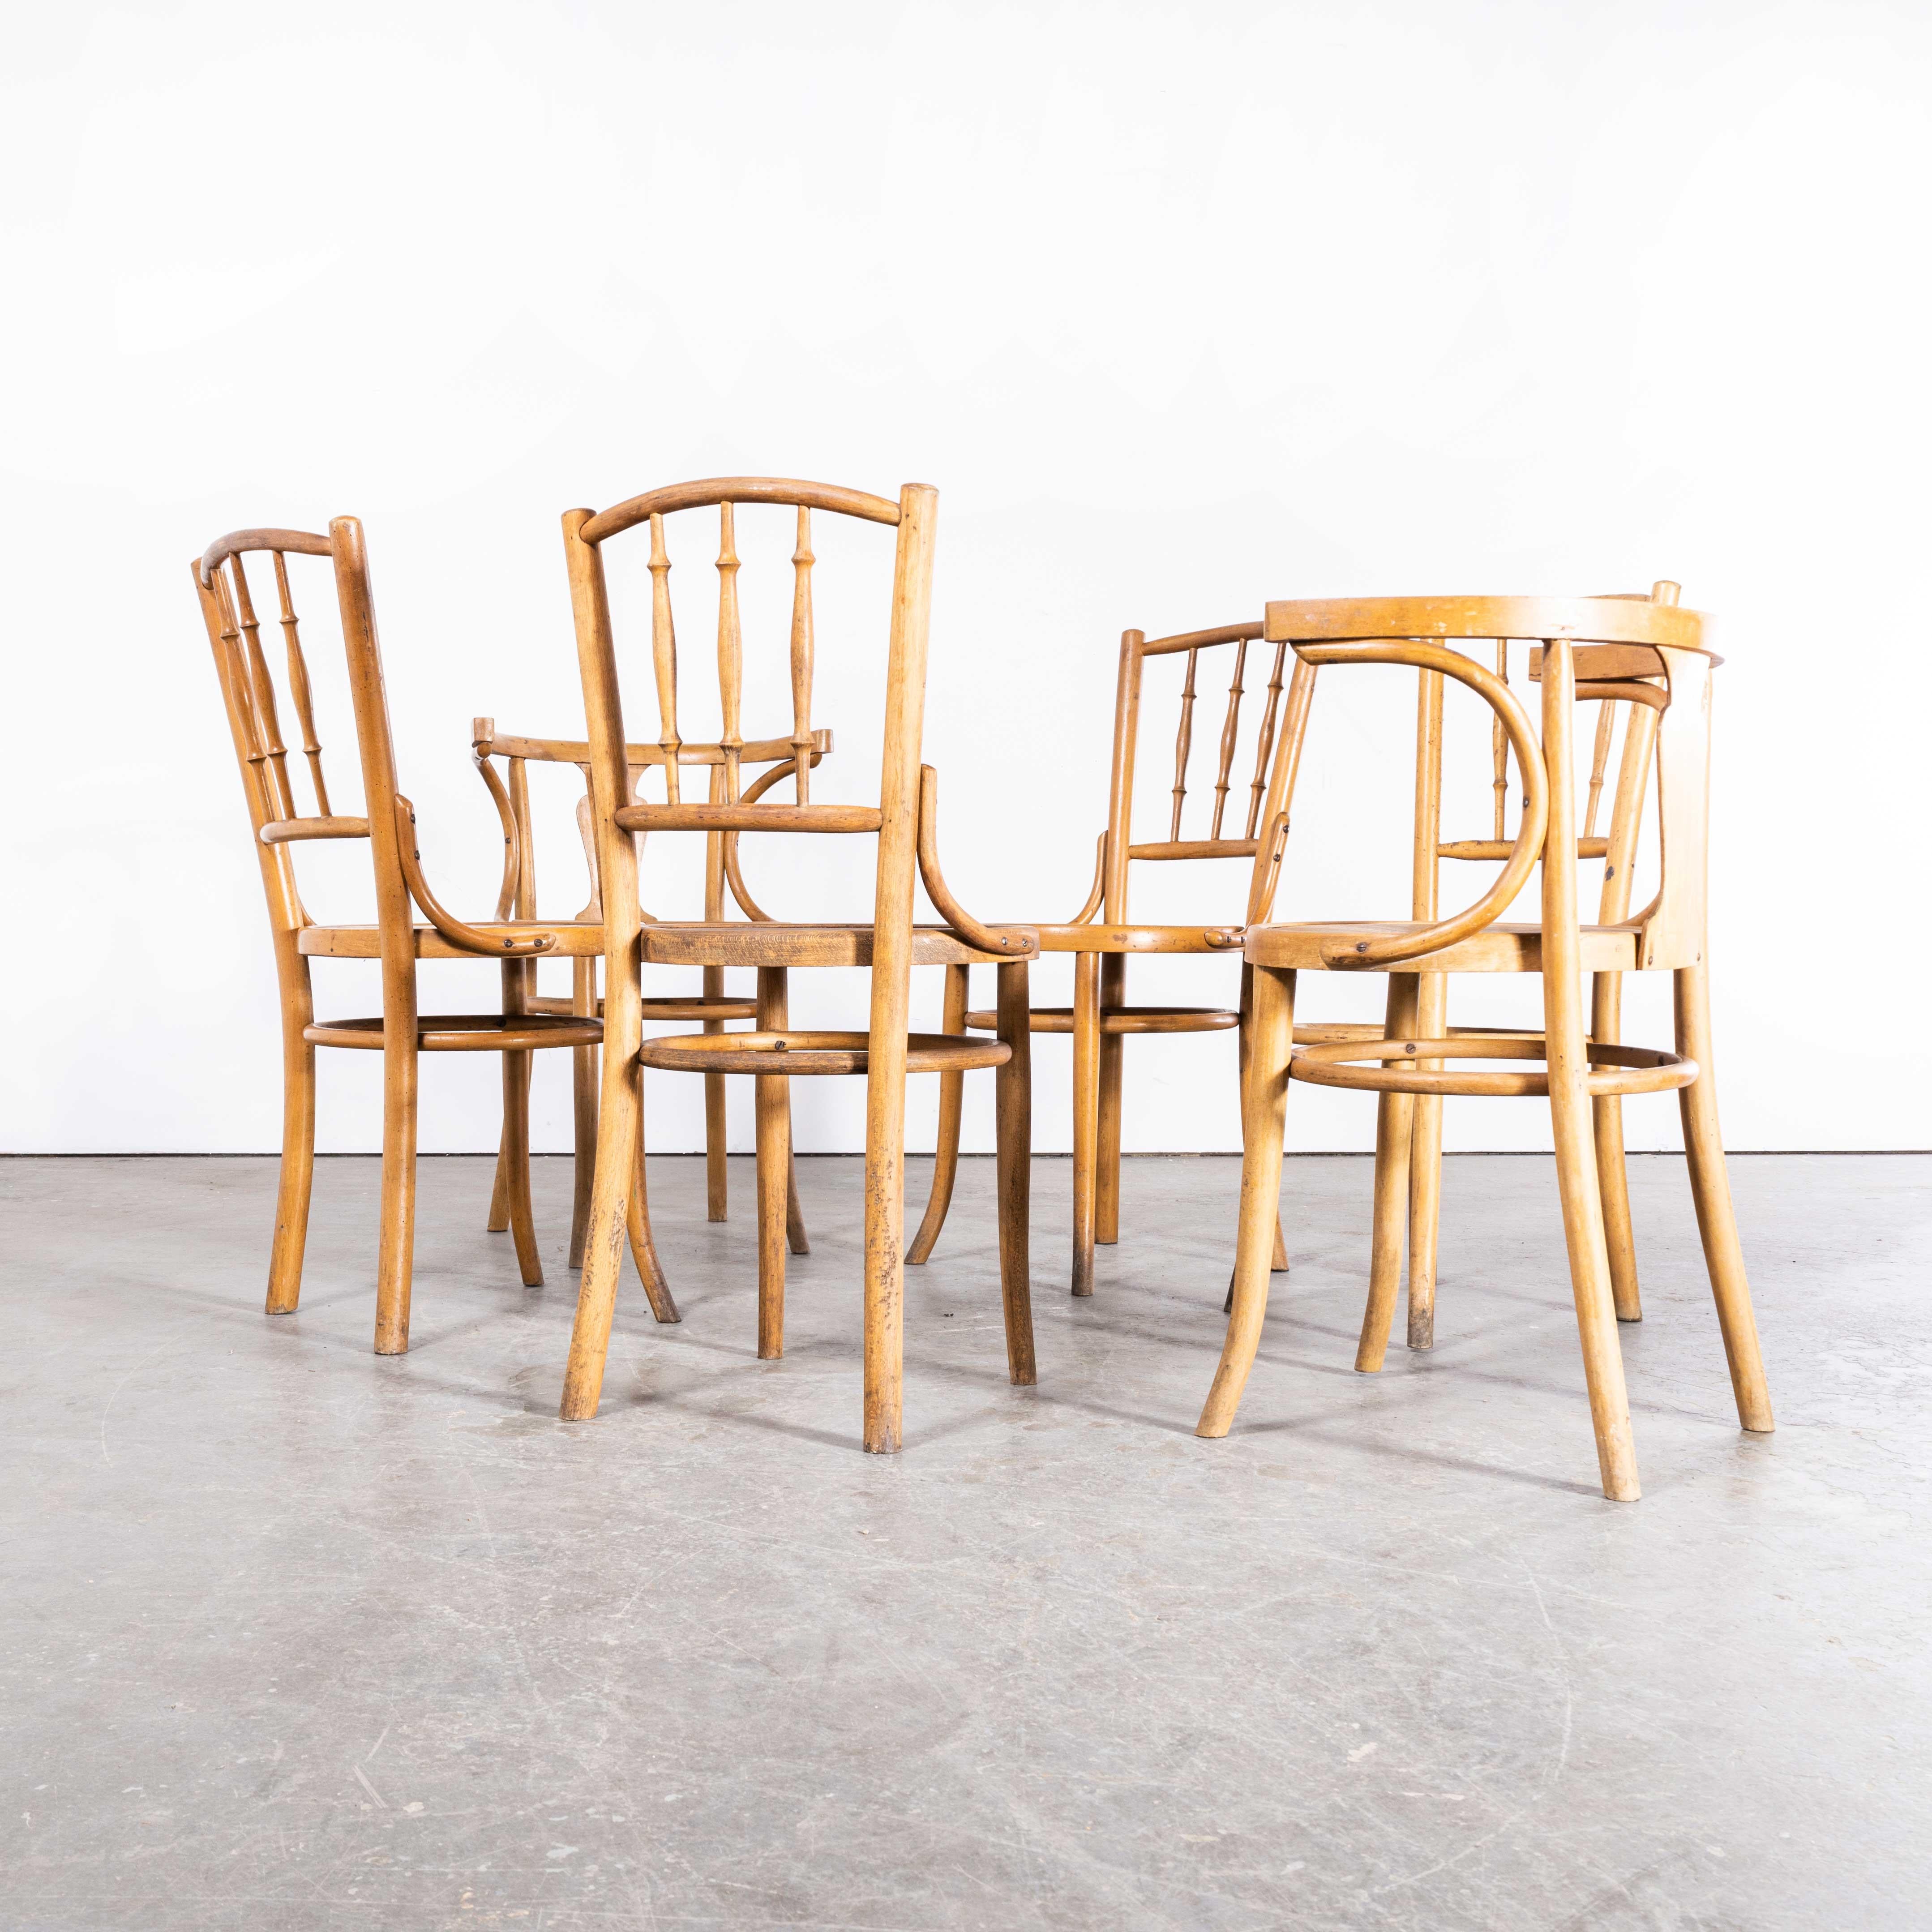 1950s Bentwood Debrecen Blonde Dining Chairs – Set Of Six
1950s Bentwood Debrecen Blonde Dining Chairs – Set Of Six. It is hard to be precise about the origin of these chairs as little history is known, but what we do know is at the beginning of